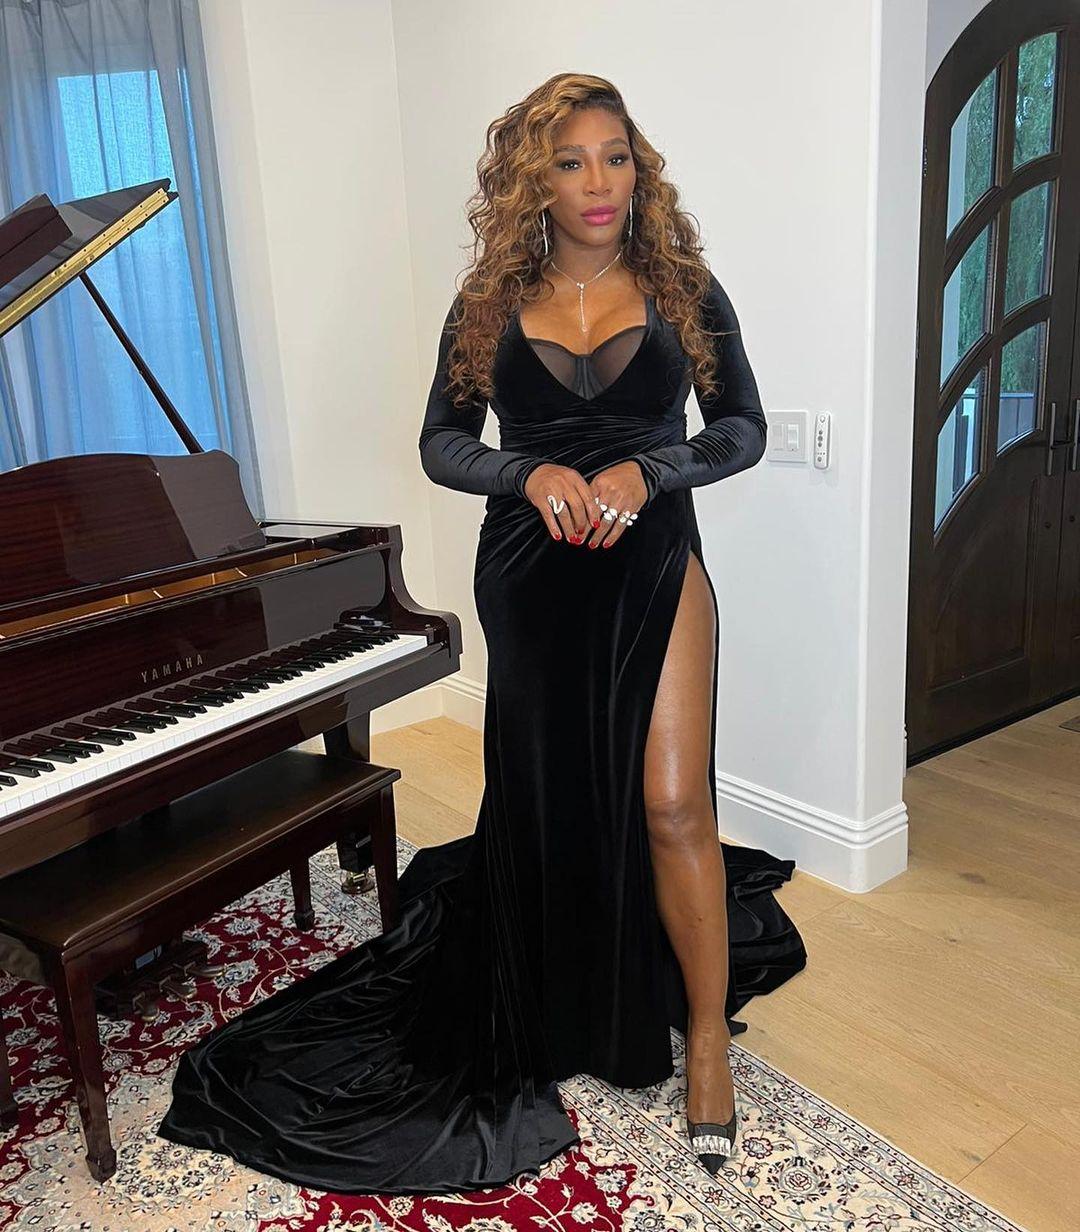 Serena Williams Flaunts Toned Legs In Thigh-High Slit Dress For NAACP Awards